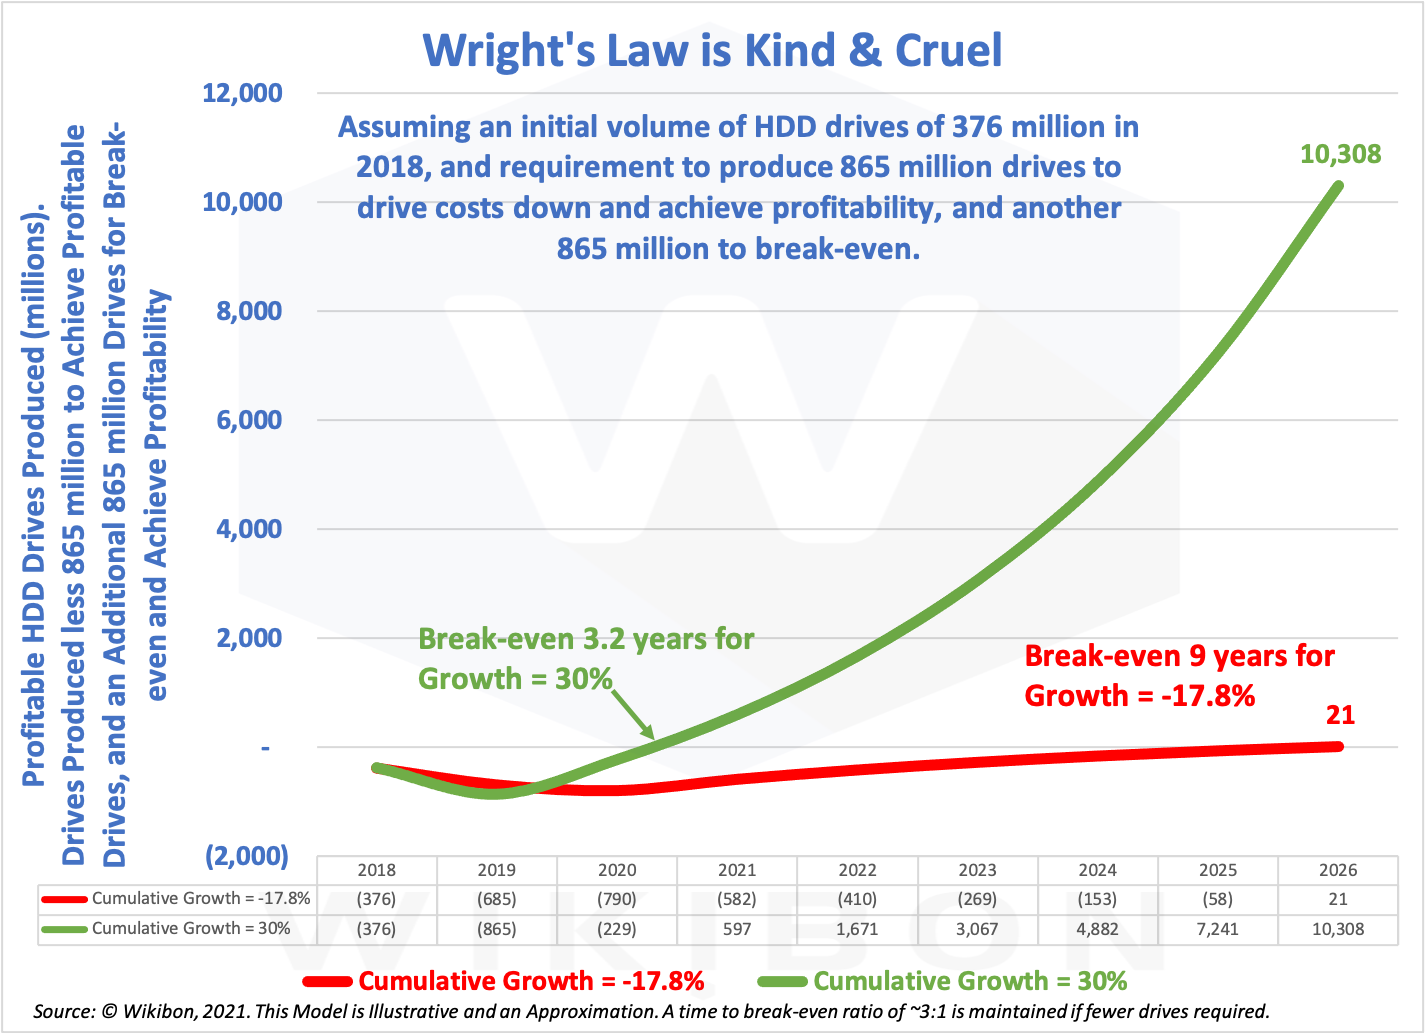 Cruelty of Wright's Law for HDD